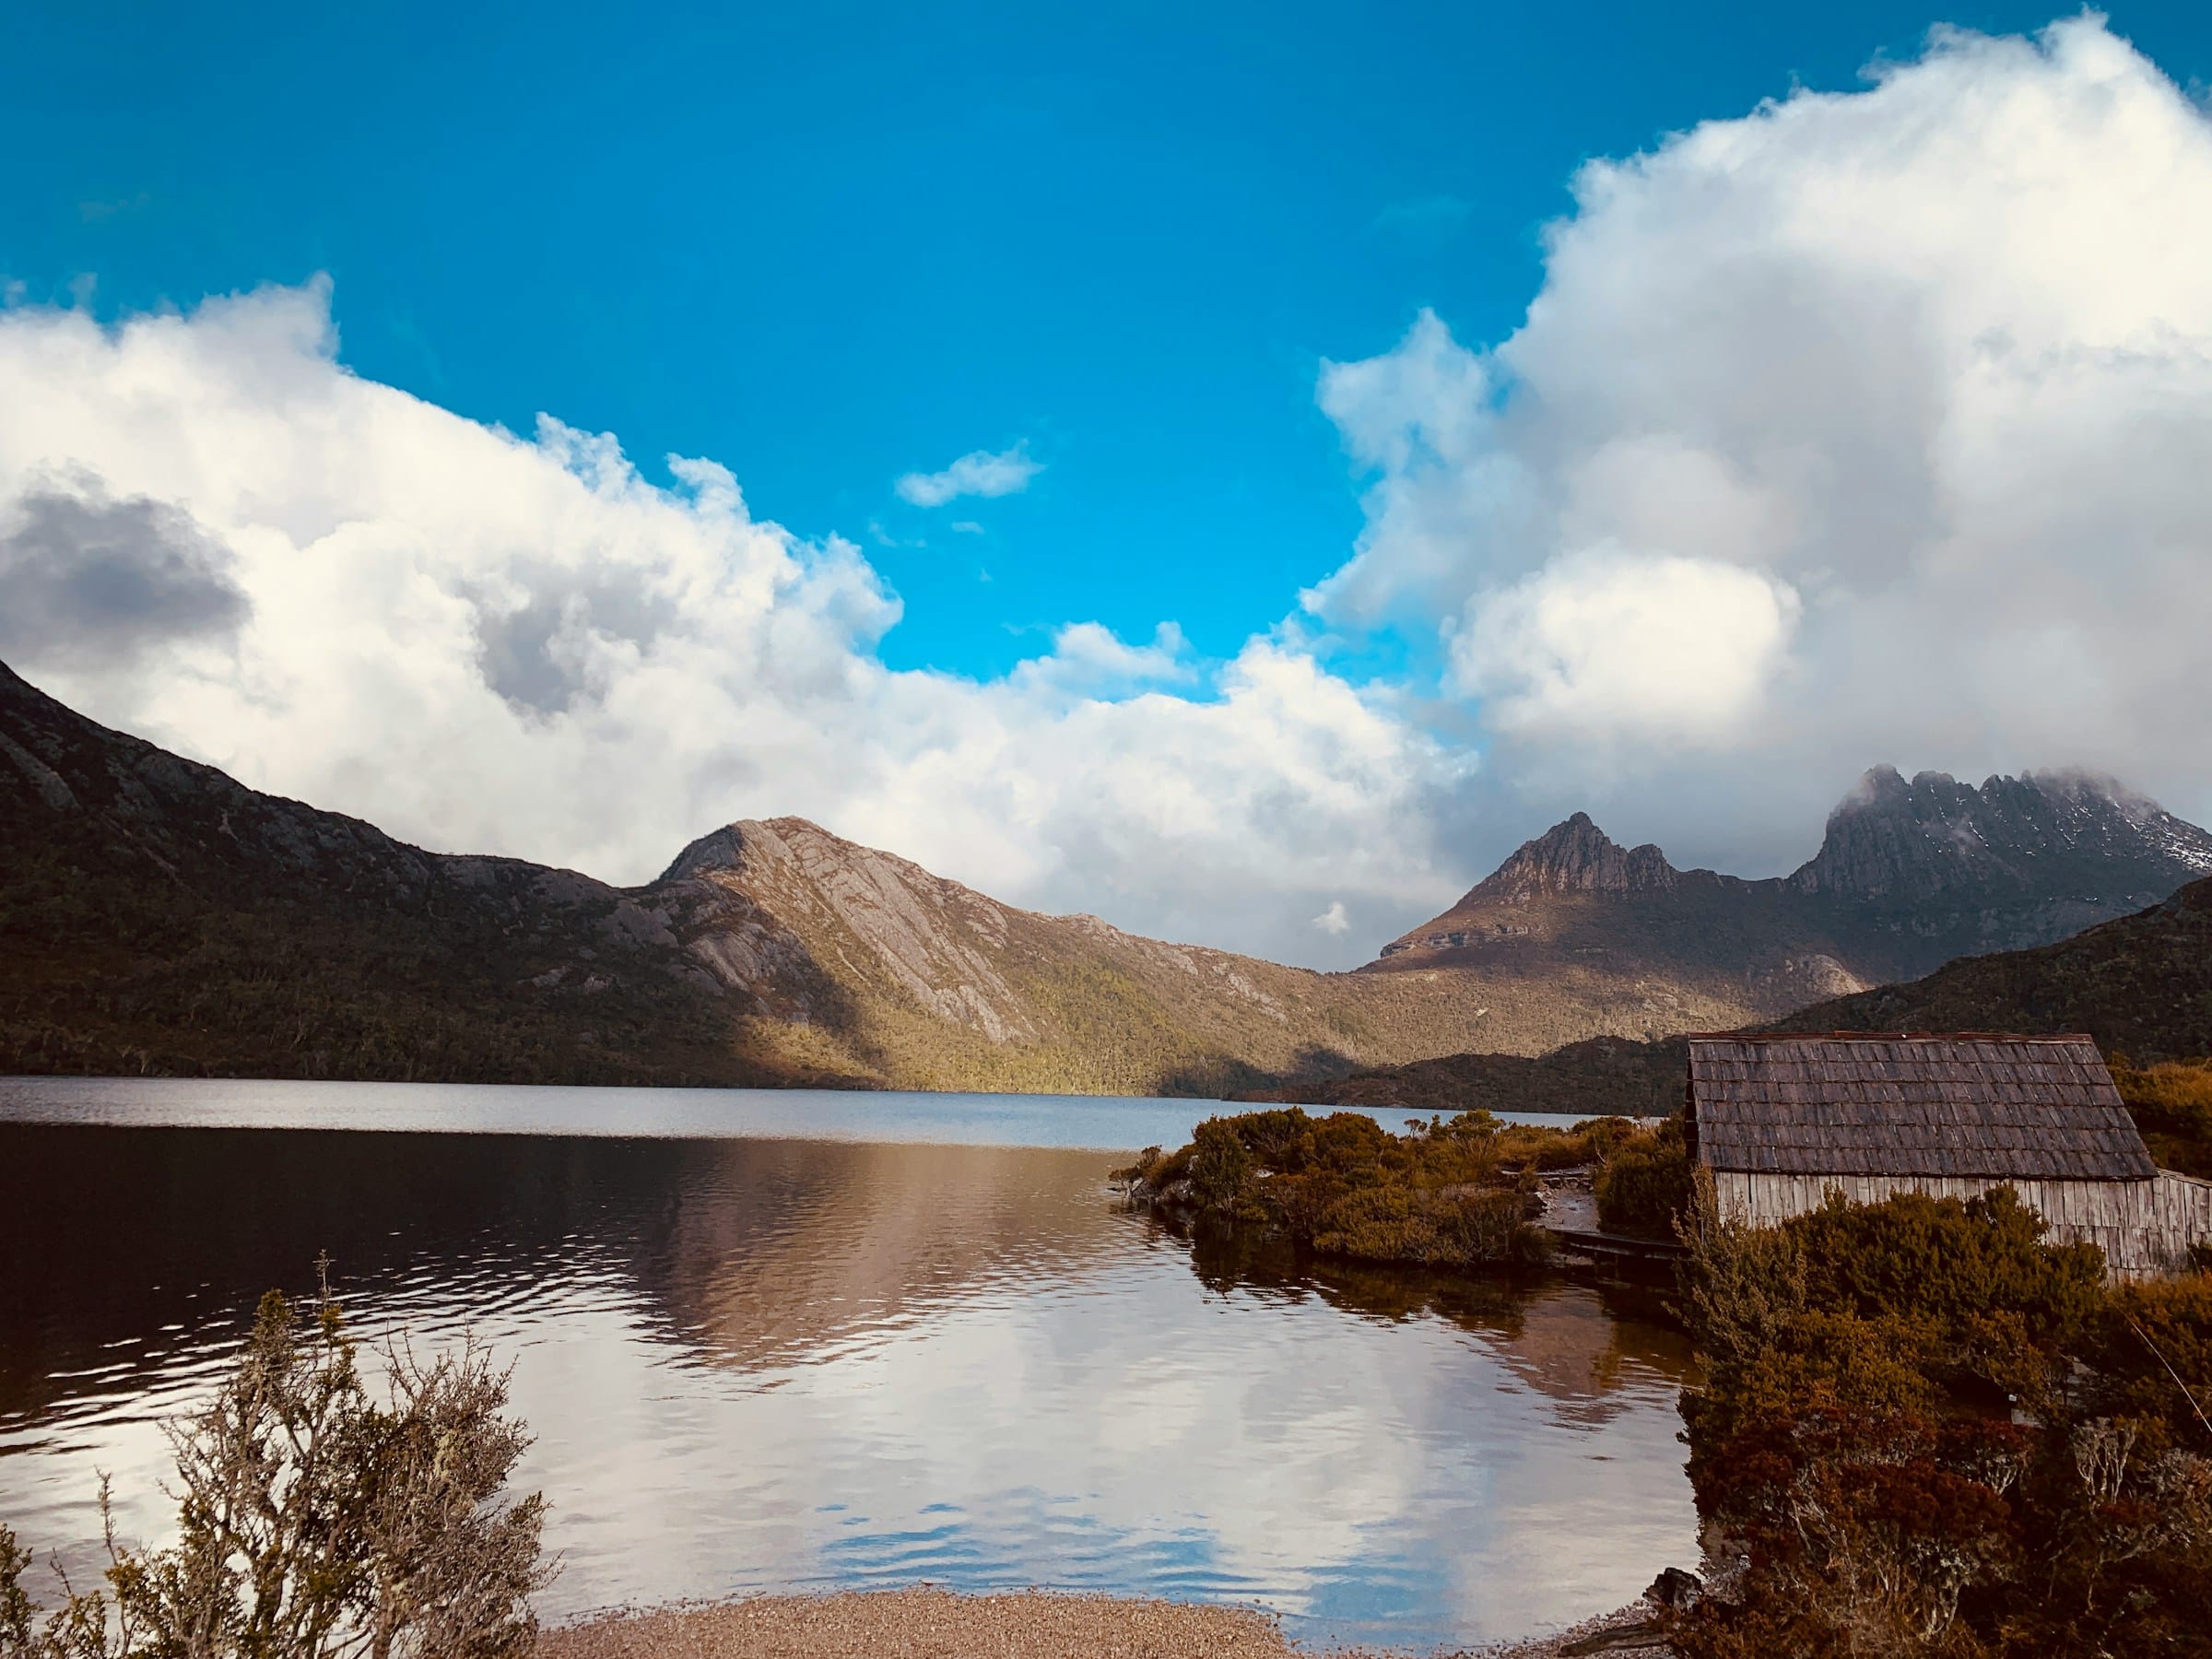 Cradle Mountain with hut and water in foreground